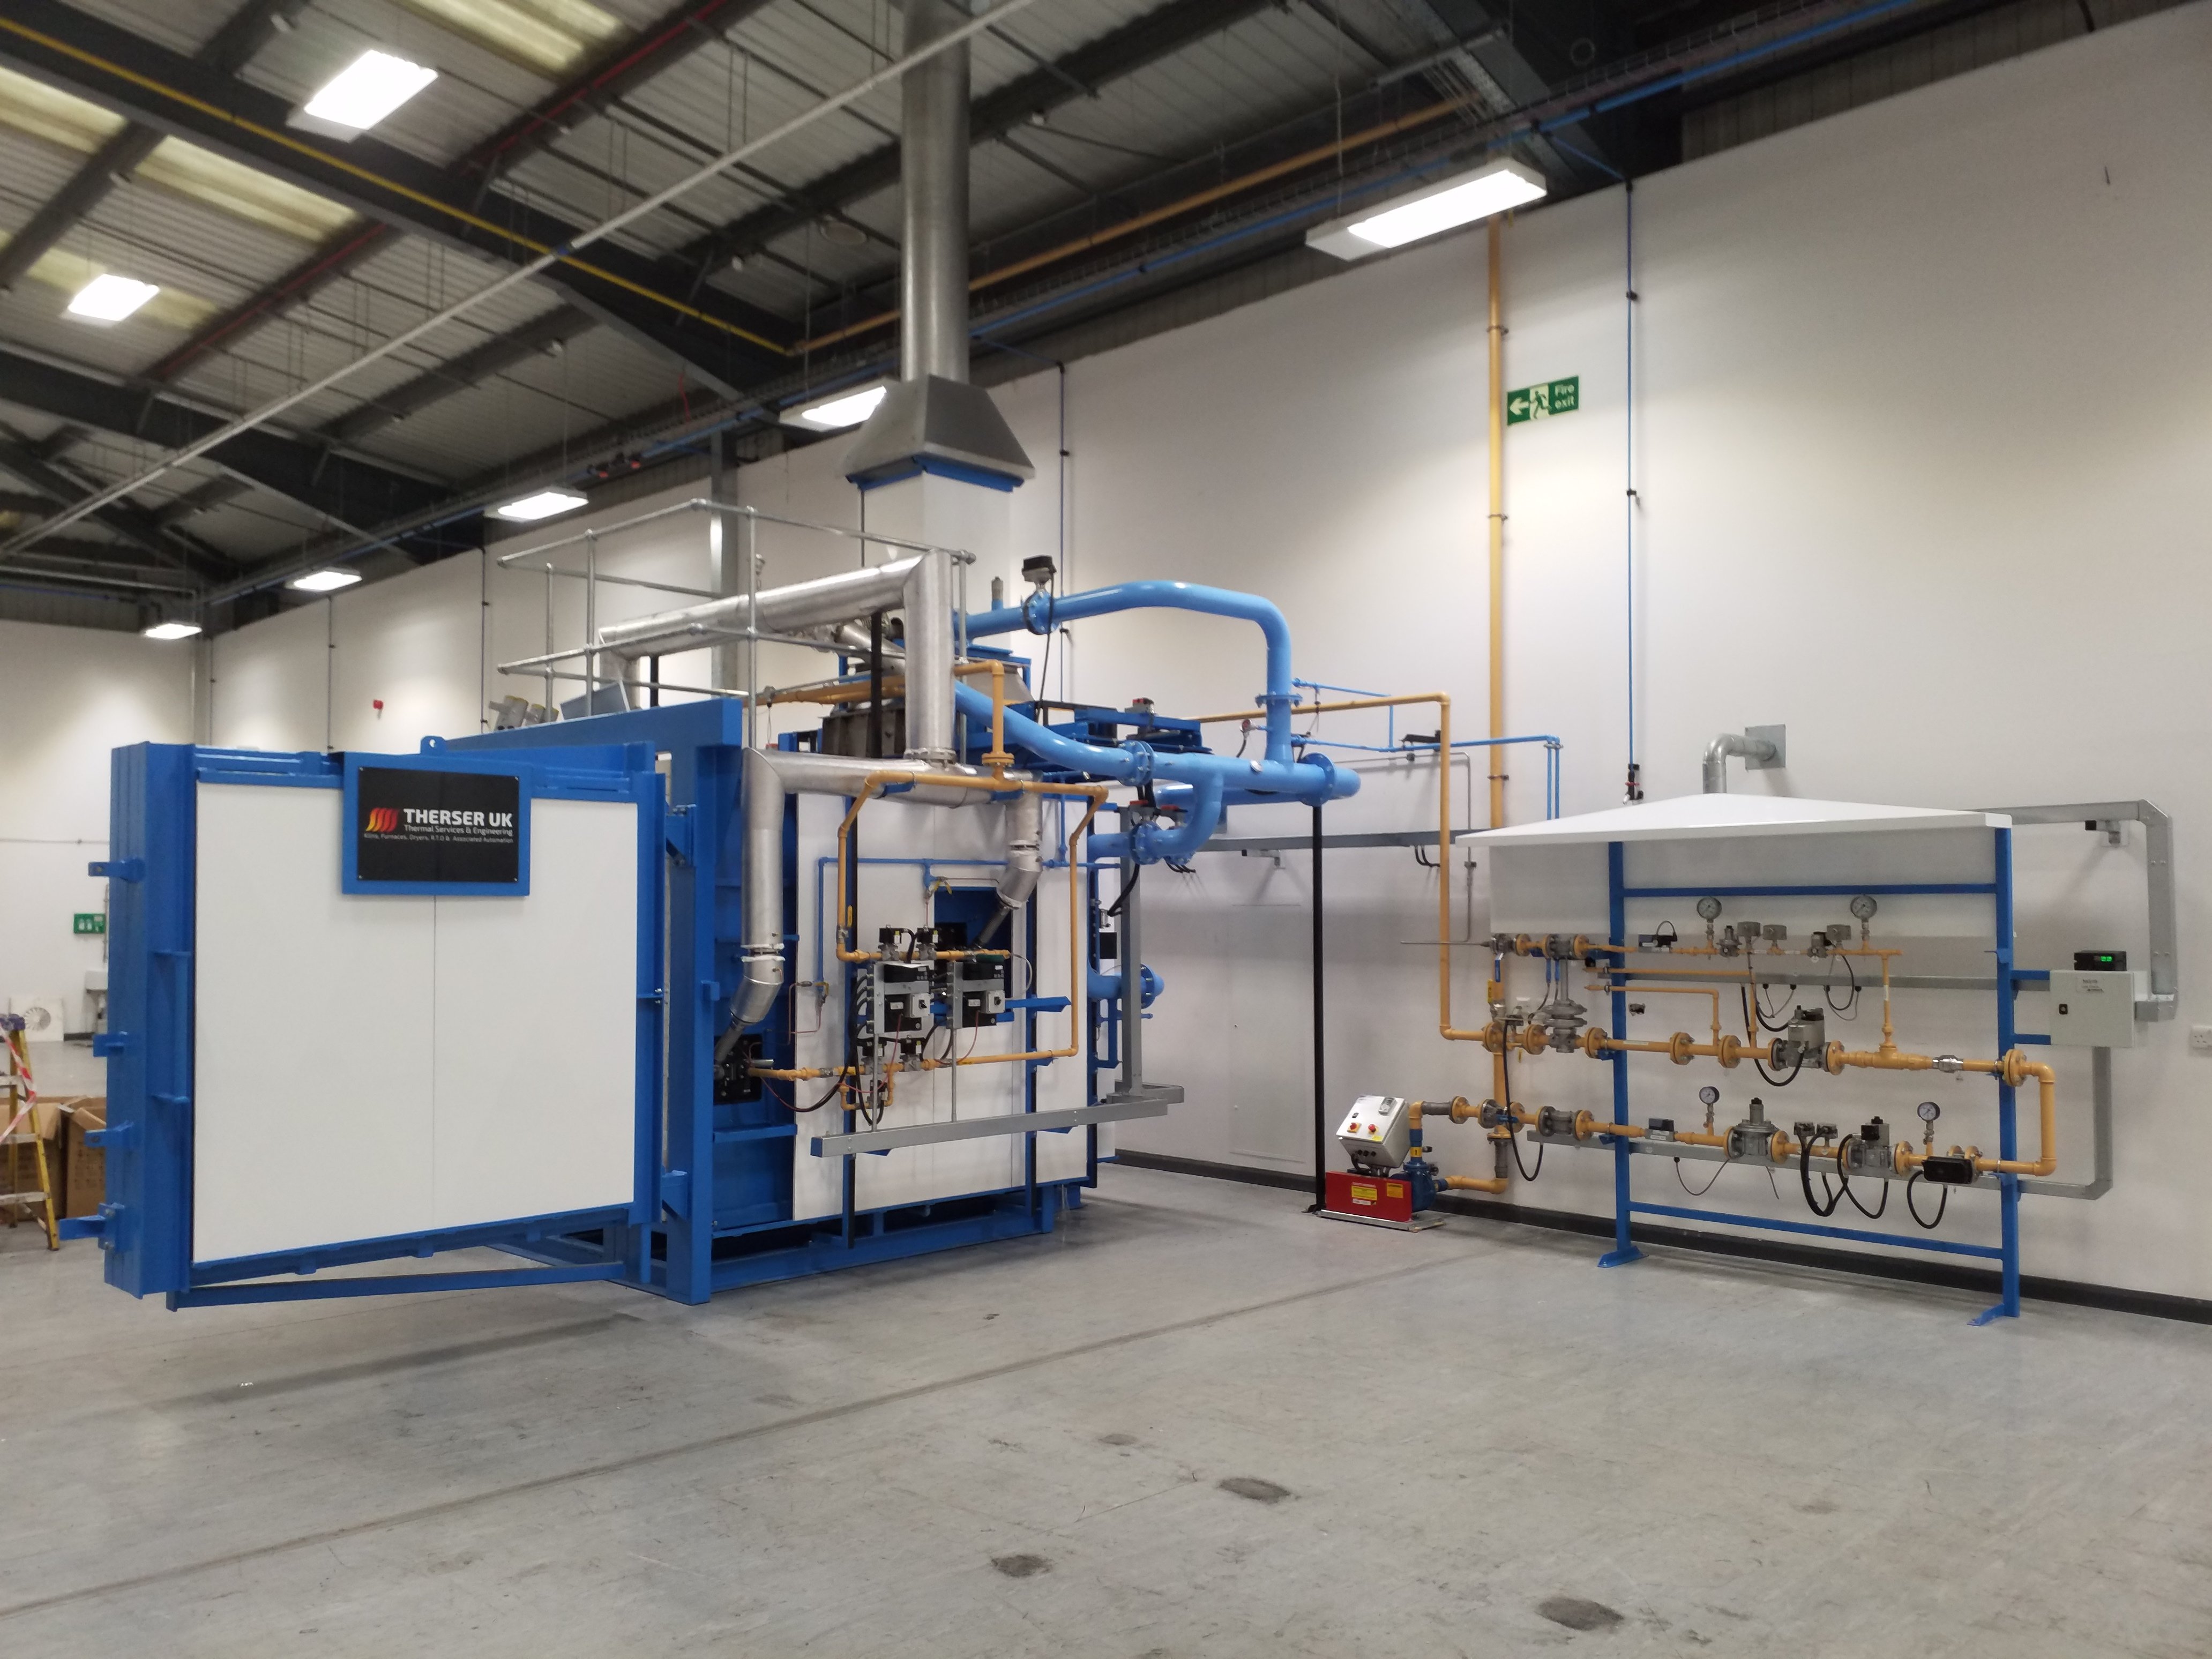 THERSER is the UK's leading Manufacturer of Hydrogen Enriched Kilns